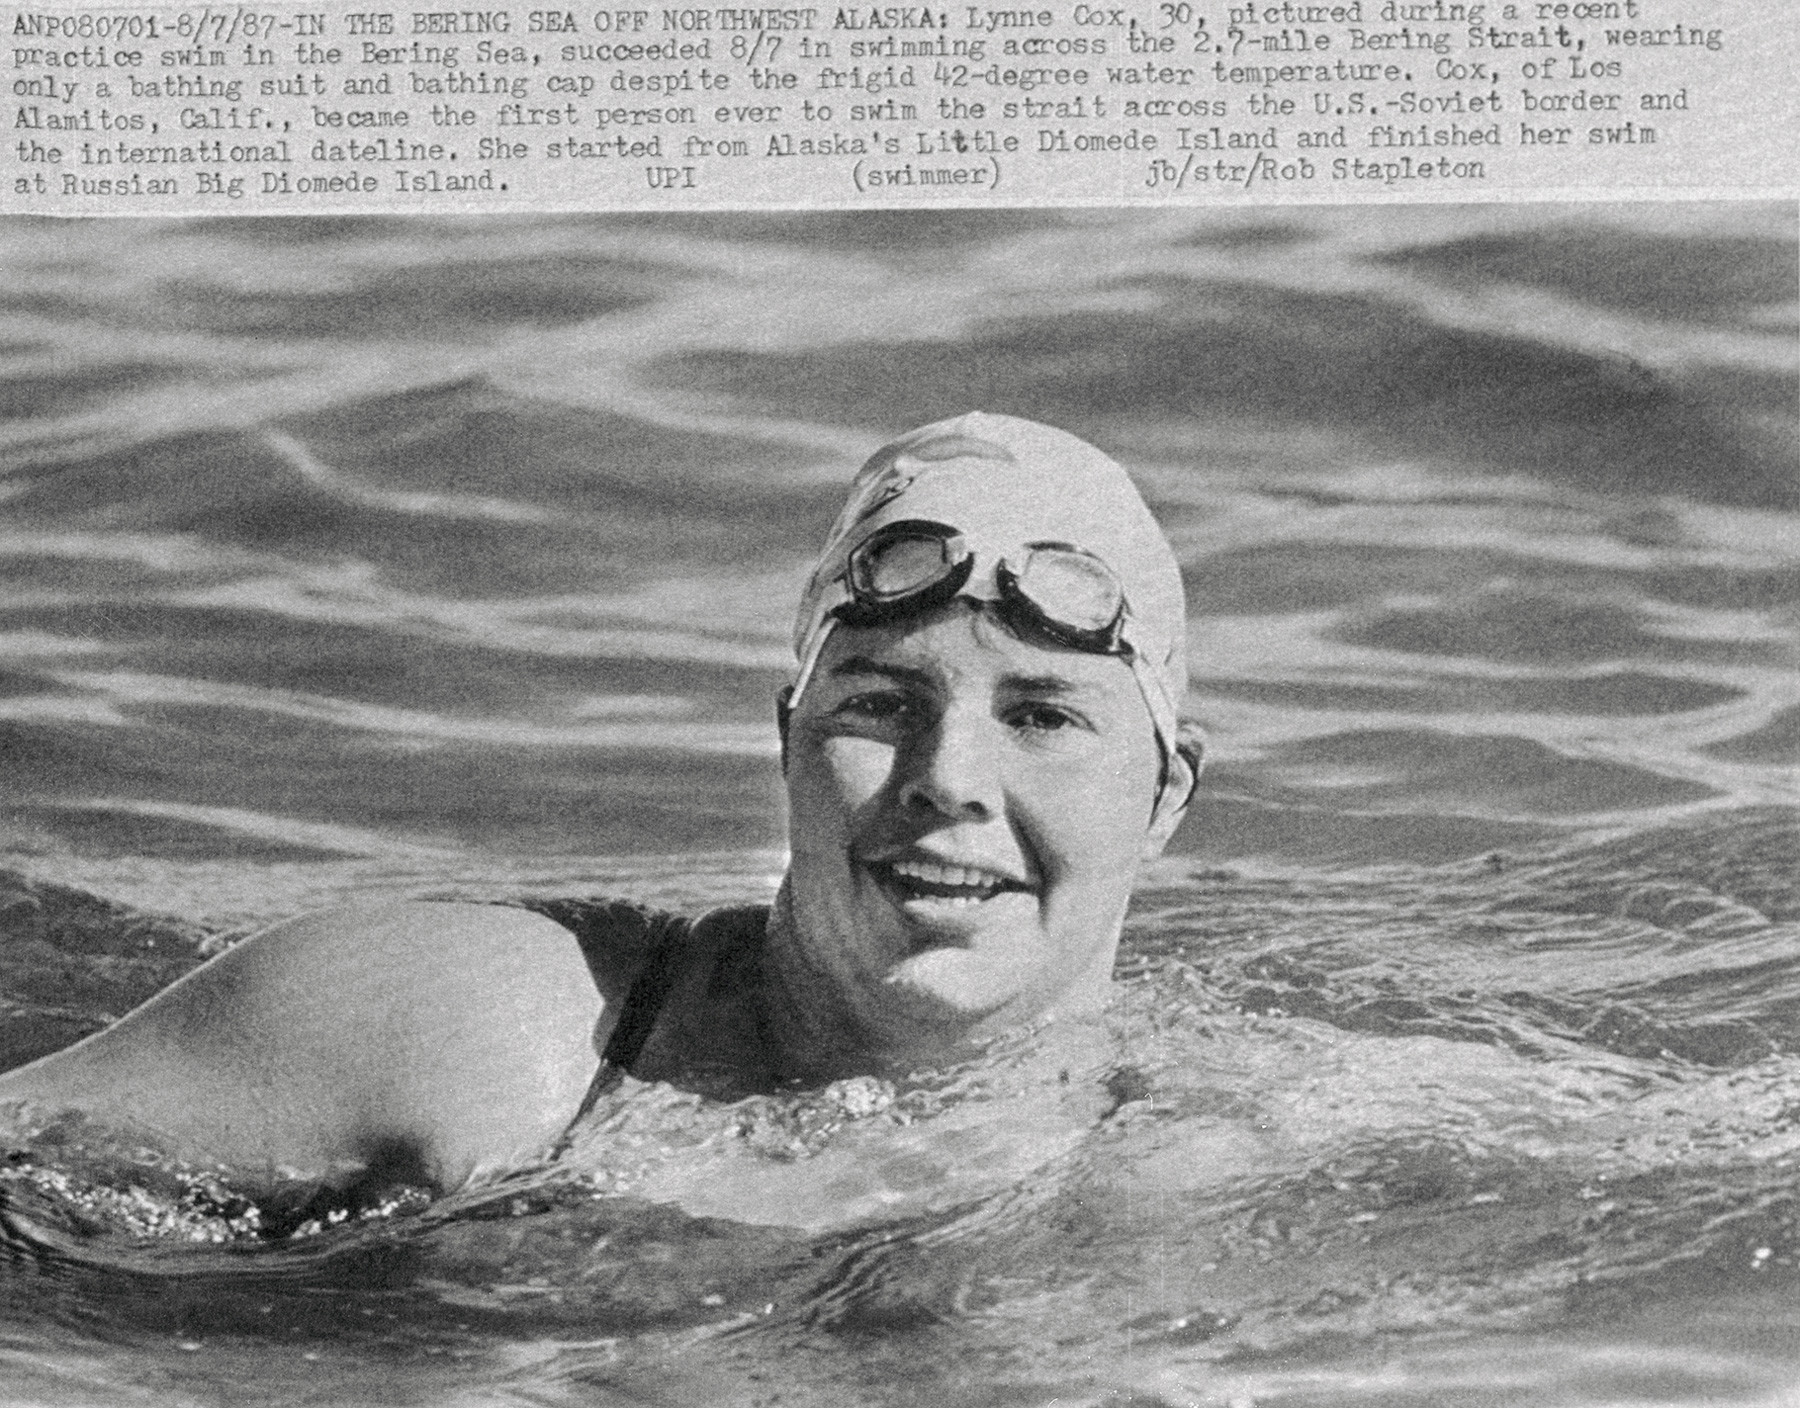 Lynne Cox, of Los Alamitos, California, the first person ever to swim the strait across the U.S.-Soviet border and the international dateline. 